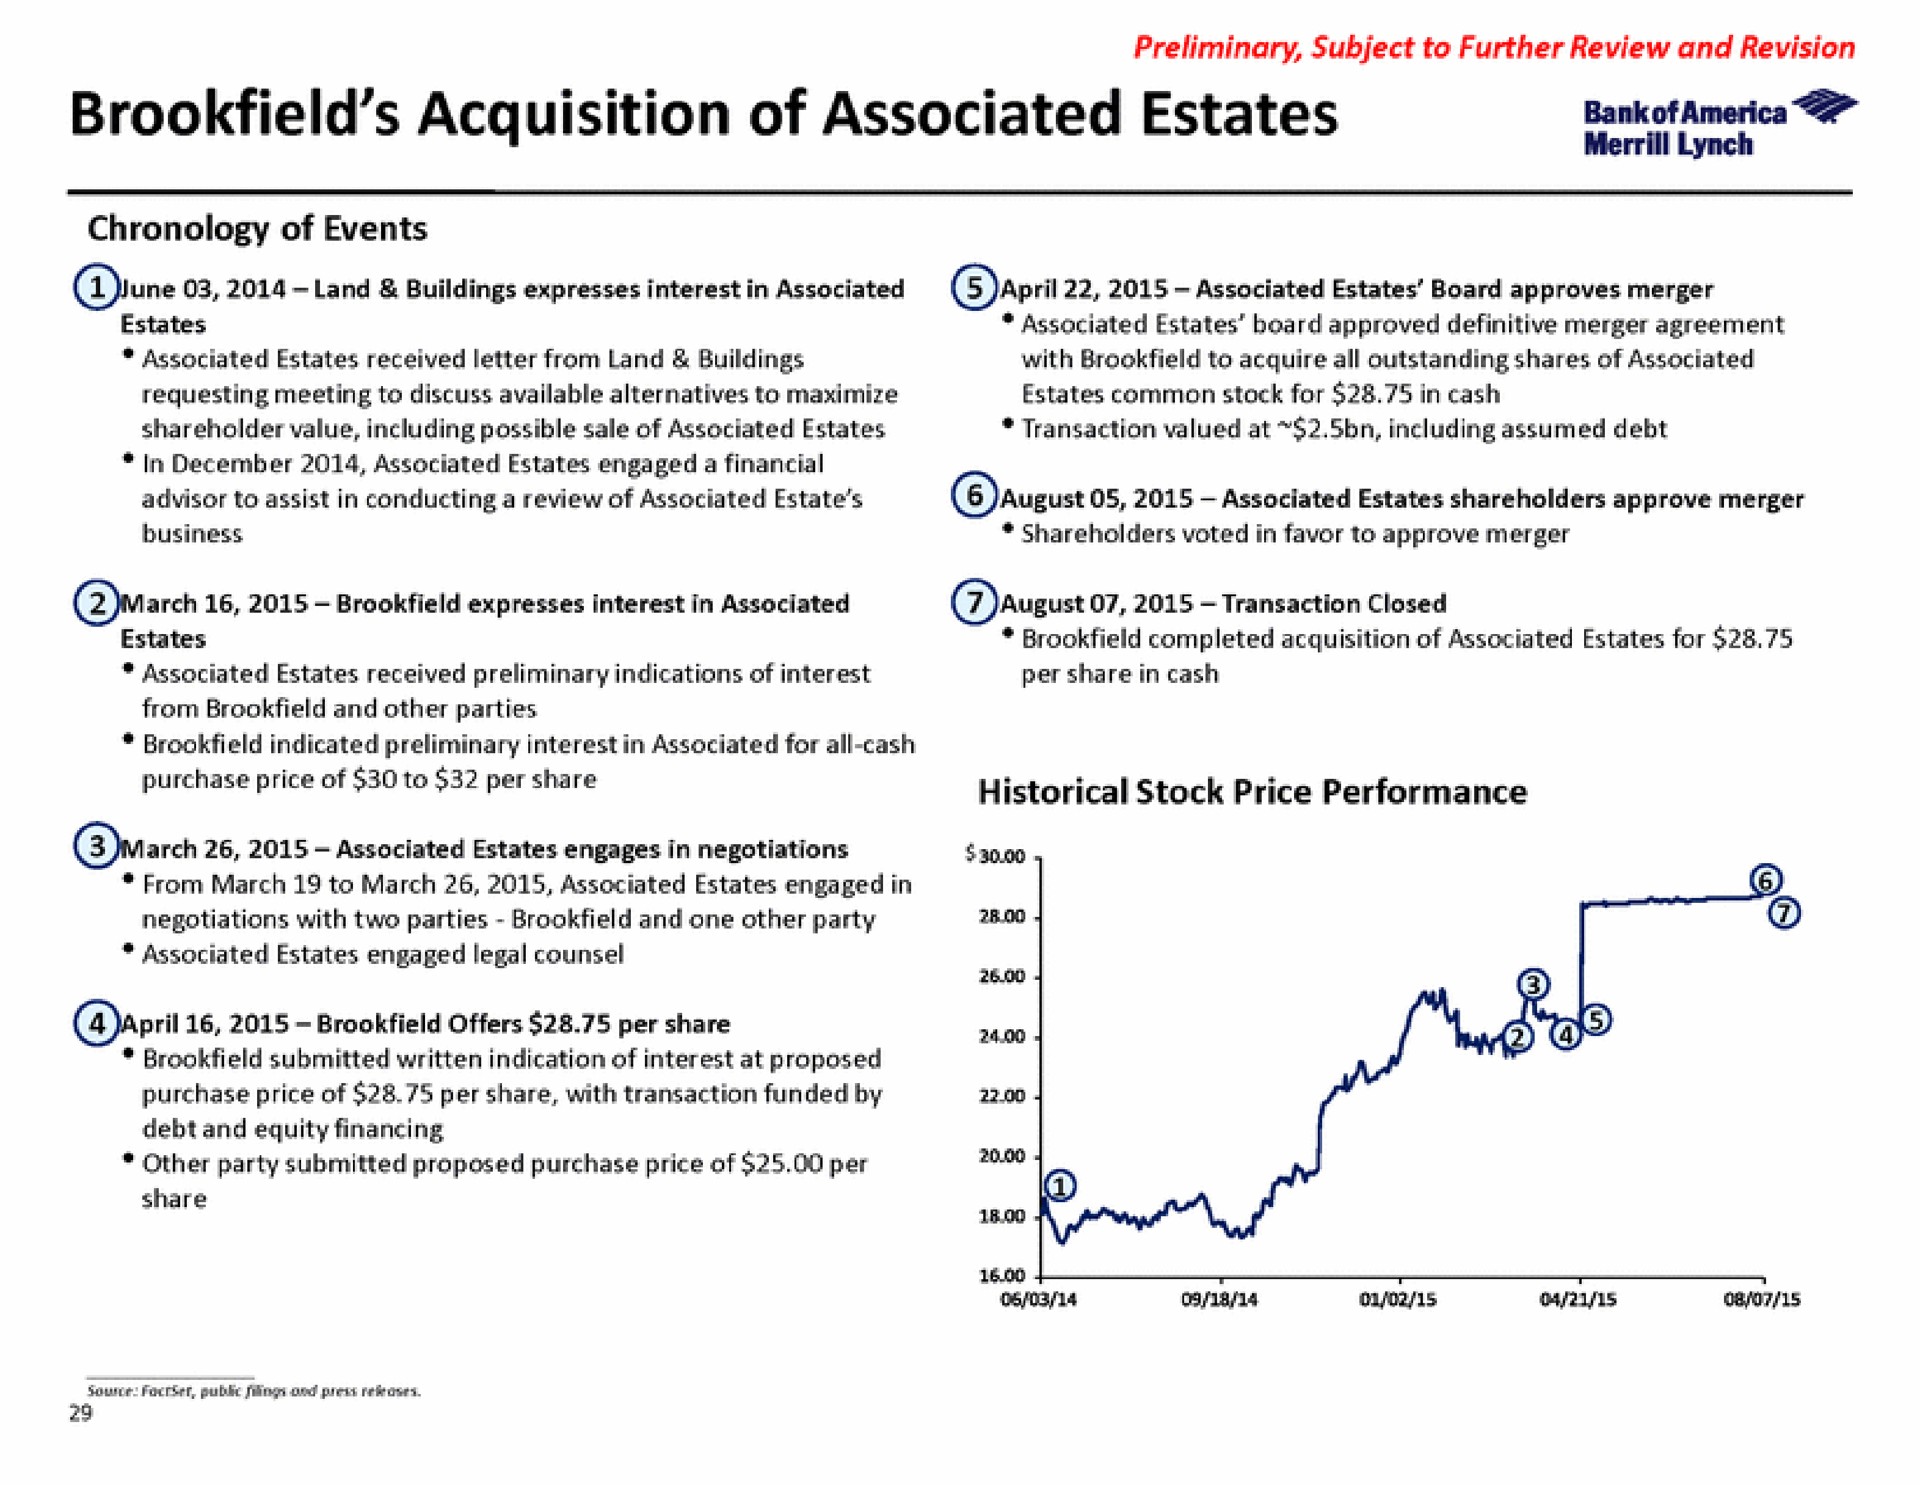 acquisition of associated estates | Bank of America